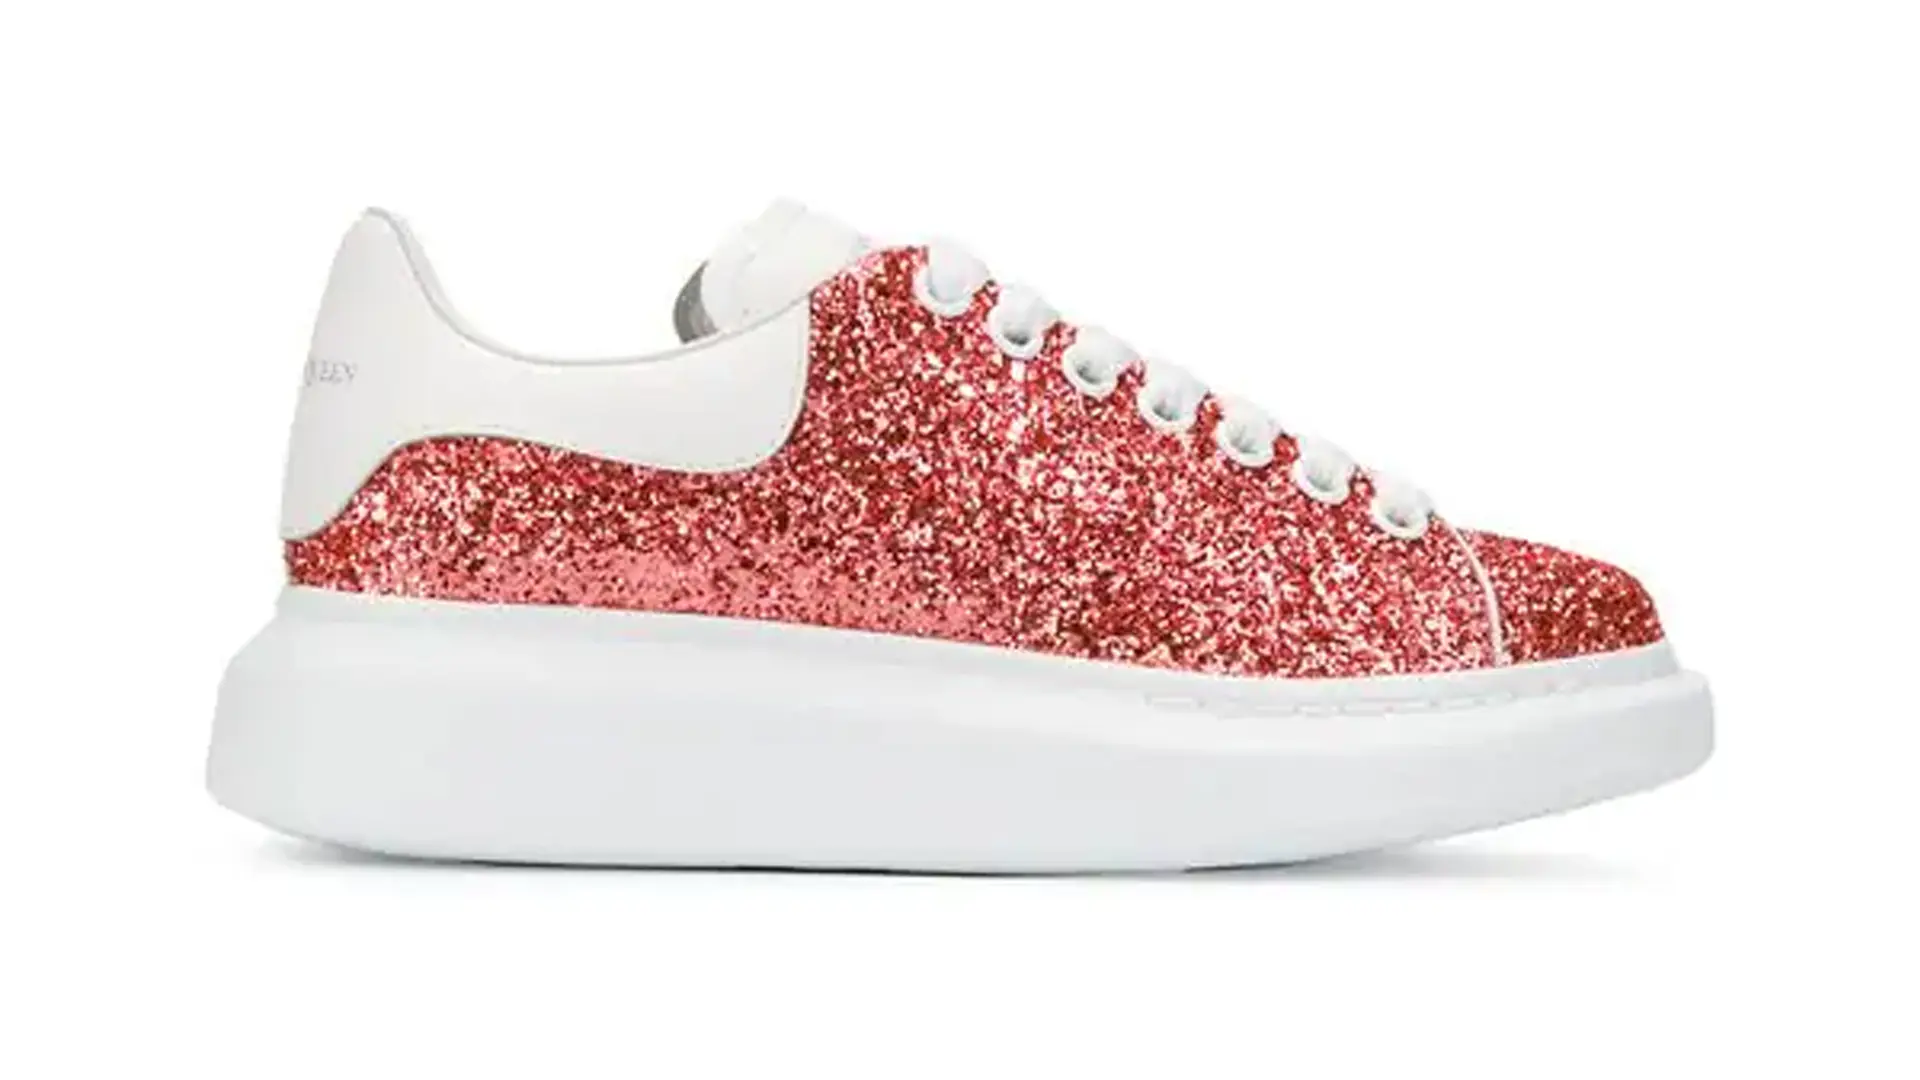 Alexander McQueen's New Season Platform Sneakers Are Covered In Glitter ...